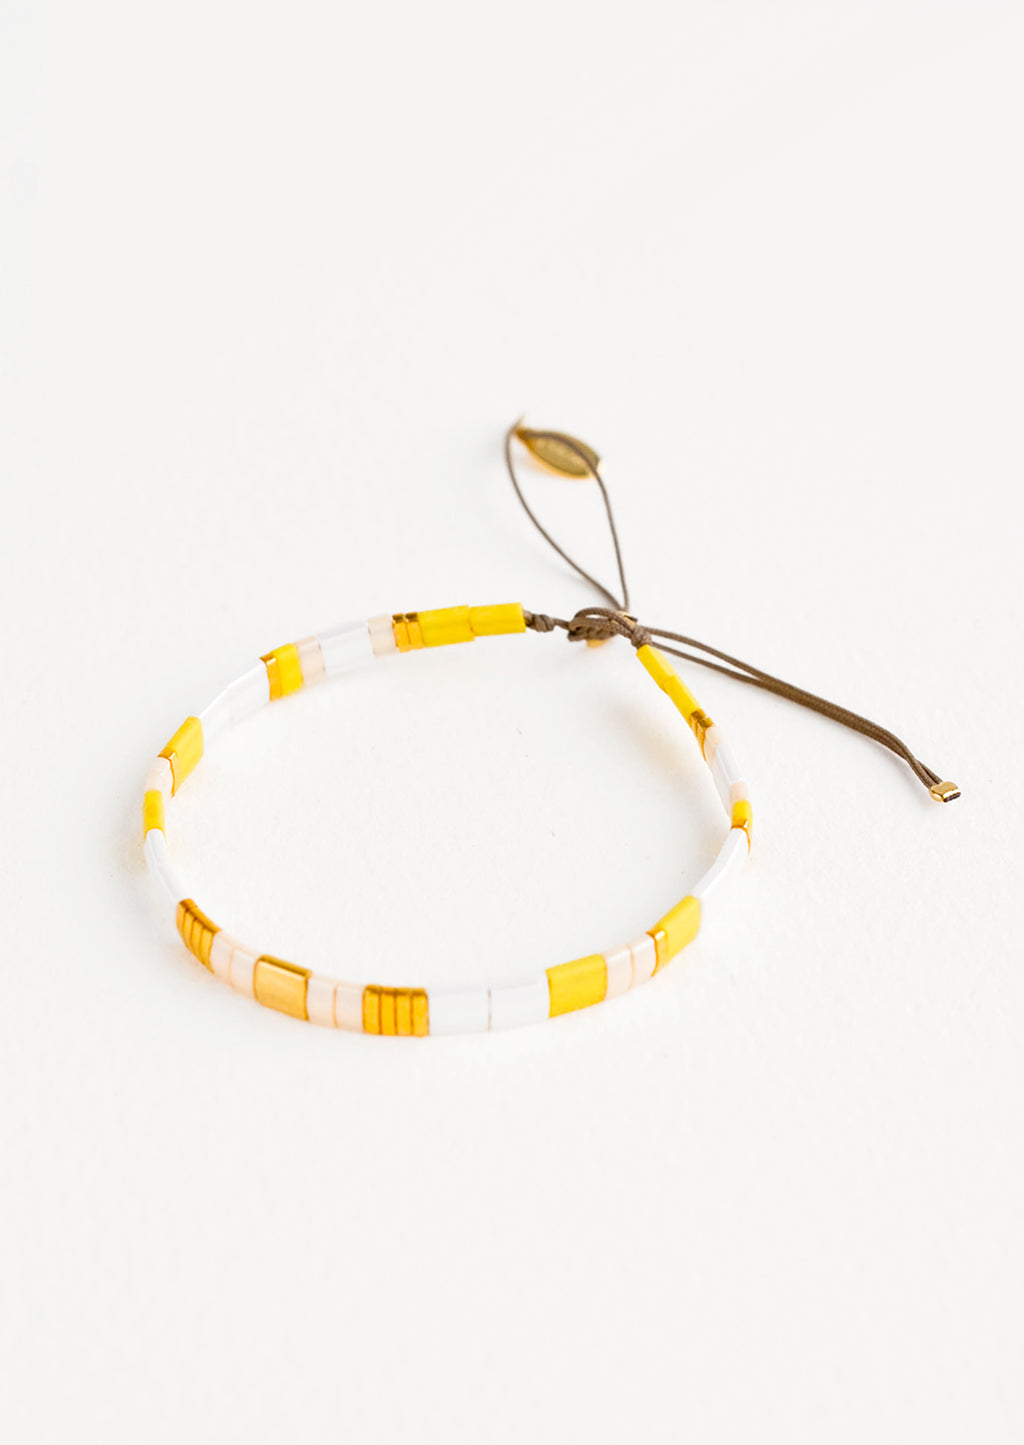 Yellow: Bracelet featuring flat yellow and white glass beads interspersed with flat gold bead on an adjustable cord.